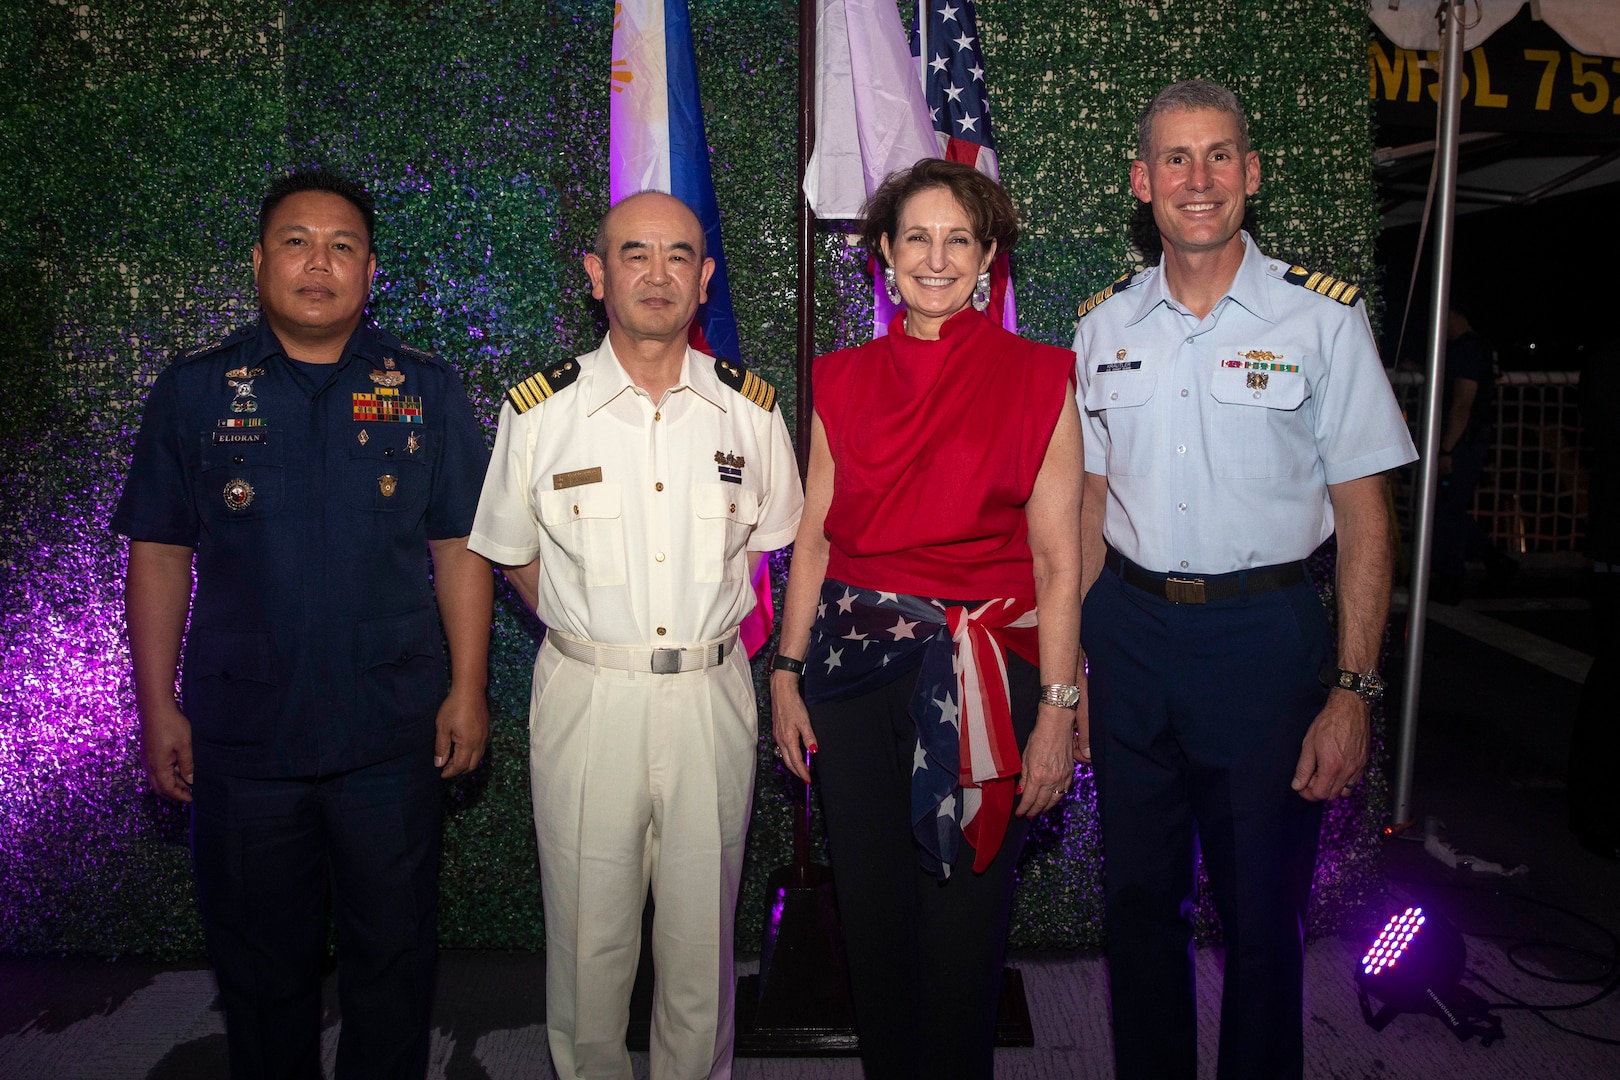 (From right) Capt. Brian Krautler, commanding officer of U.S. Coast Guard Cutter Stratton (WMSL 752), Ambassador MaryKay L. Carlson, U.S. ambassador to the Republic of the Philippines, Capt. Toru Imai, commanding officer of Japan Coast Guard Vessel Akitsushima (PLH 32), and Philippine Coast Guard Capt. Roderik Elorian, stand together arm-in-arm at a dinner aboard Stratton in Manila, Philippines, June 2, 2023, to commemorate a multi-day trilateral engagement with the three services. Stratton deployed to the Western Pacific to conduct engagements with regional allies and partner nations, reinforcing a rules-based order in the maritime domain. (U.S. Navy photo by Chief Petty Officer Brett Cote)